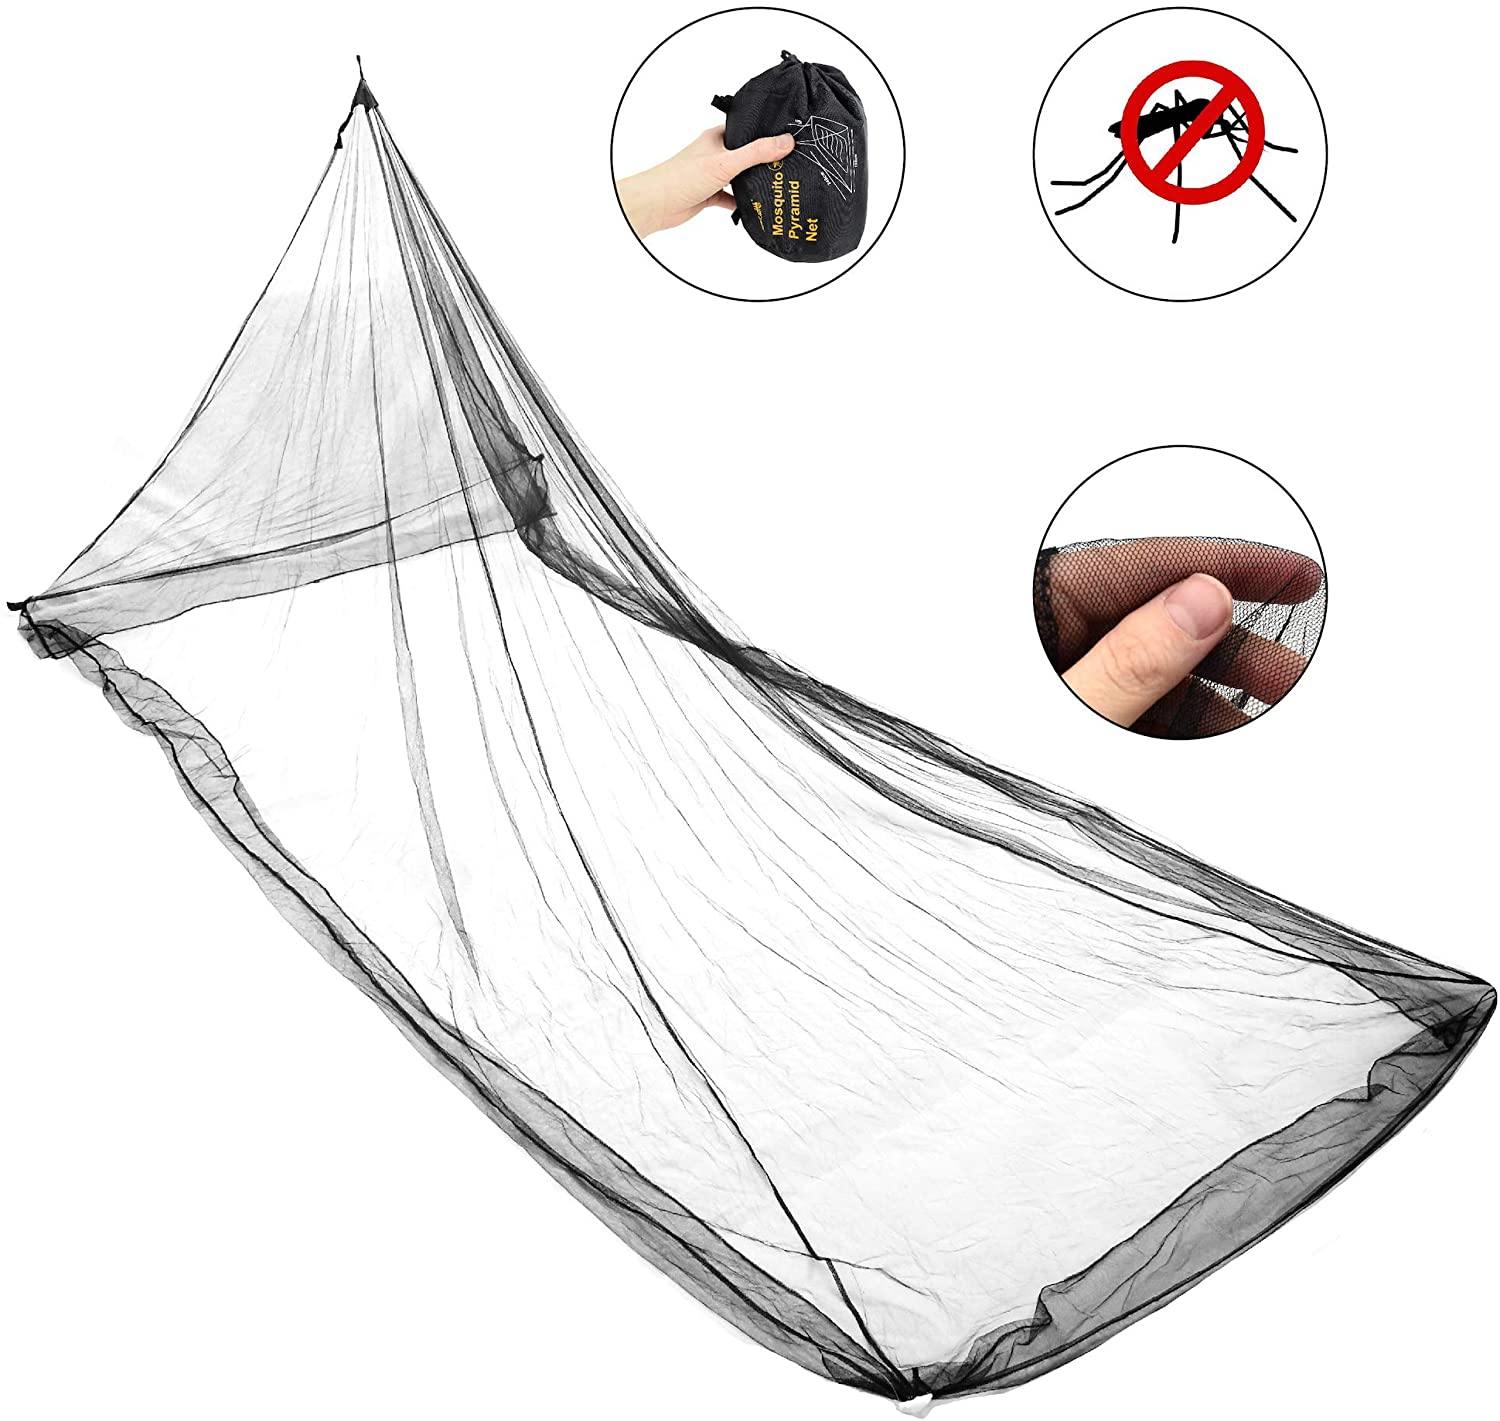 Ace Camp Mosquito and Insect Protection Pyramid Net, Mosquito Nets, Ace Camp, Defiance Outdoor Gear Co.